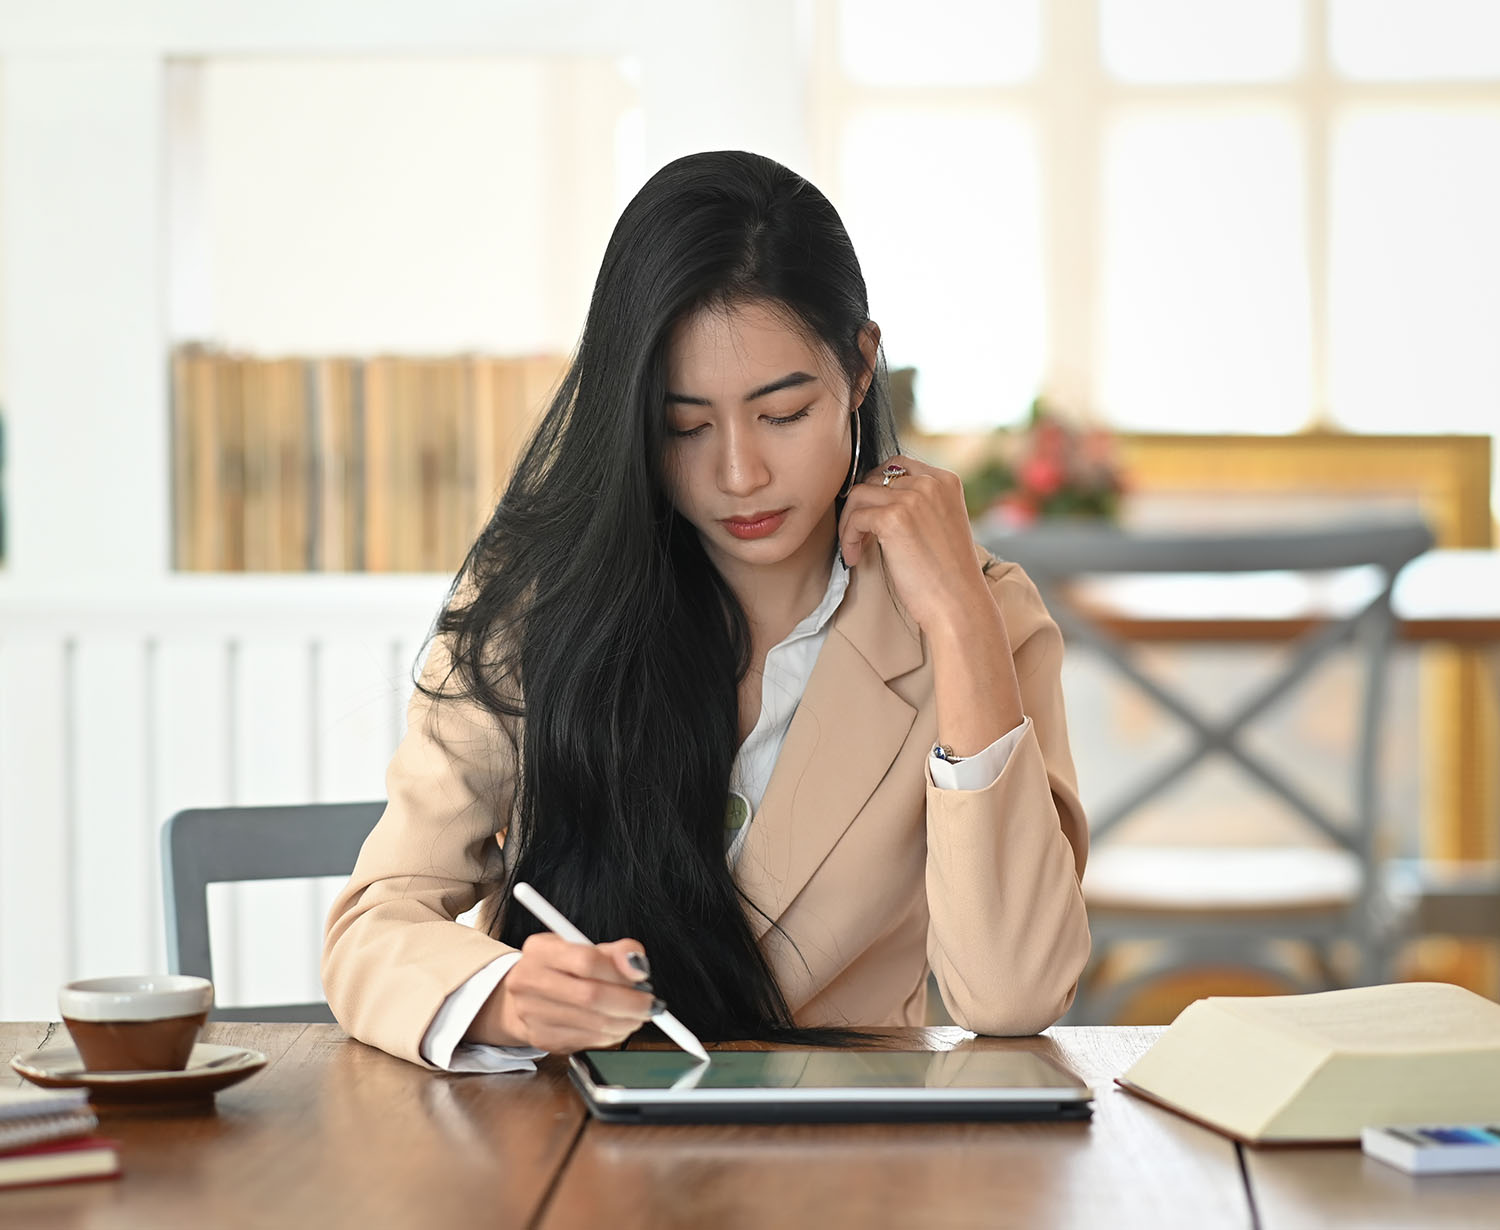 Asian woman writing on a tablet